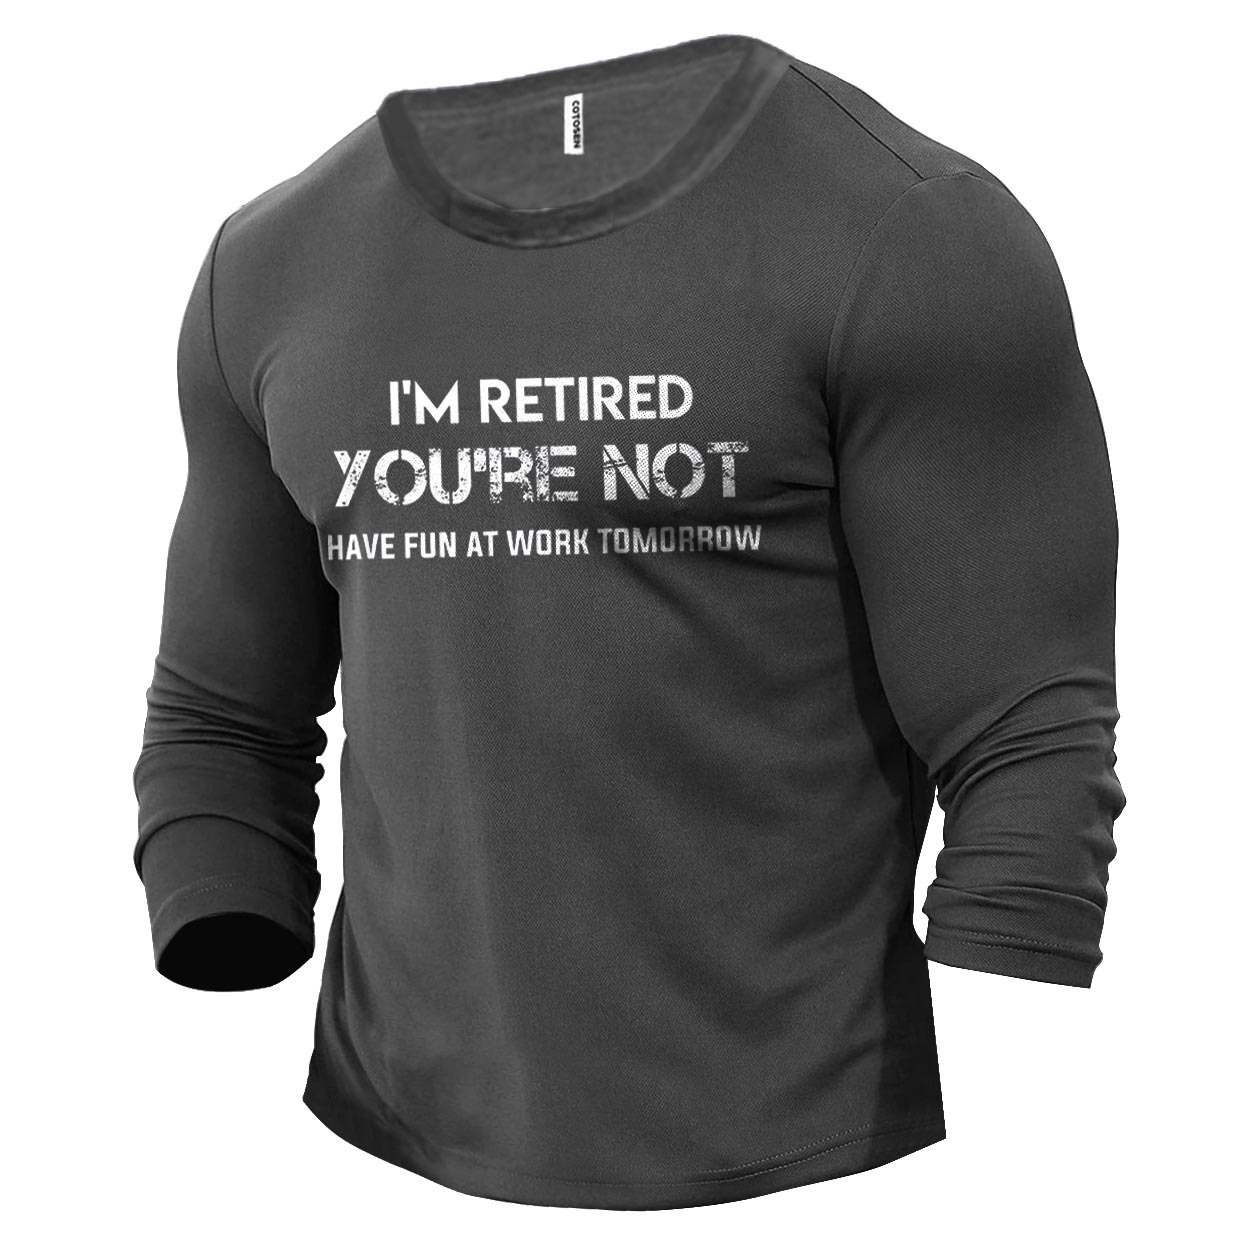 Men's I'm Retired You're Chic Not Have Fun At Work Tomorrow Cotton Long Sleeve T-shirt